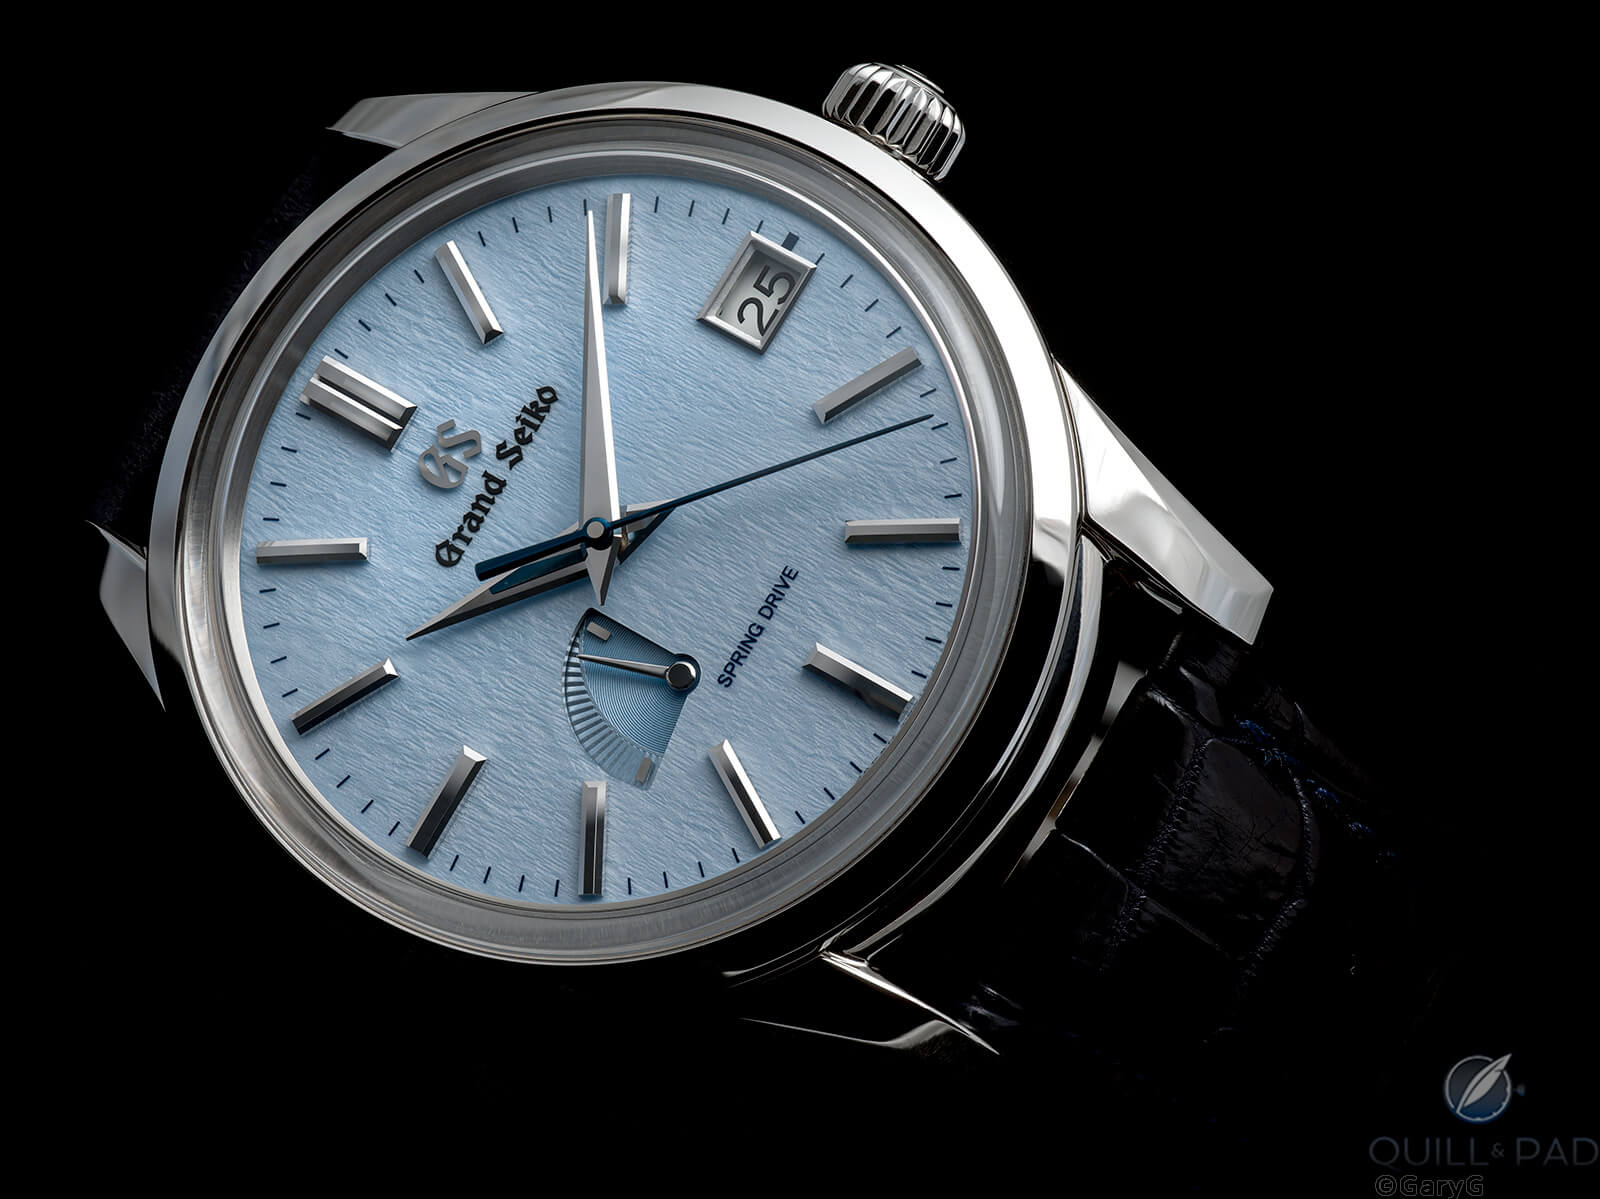 Grand Seiko Blue Snowflake Reference SBGA407: On The Wrist - Quill & Pad